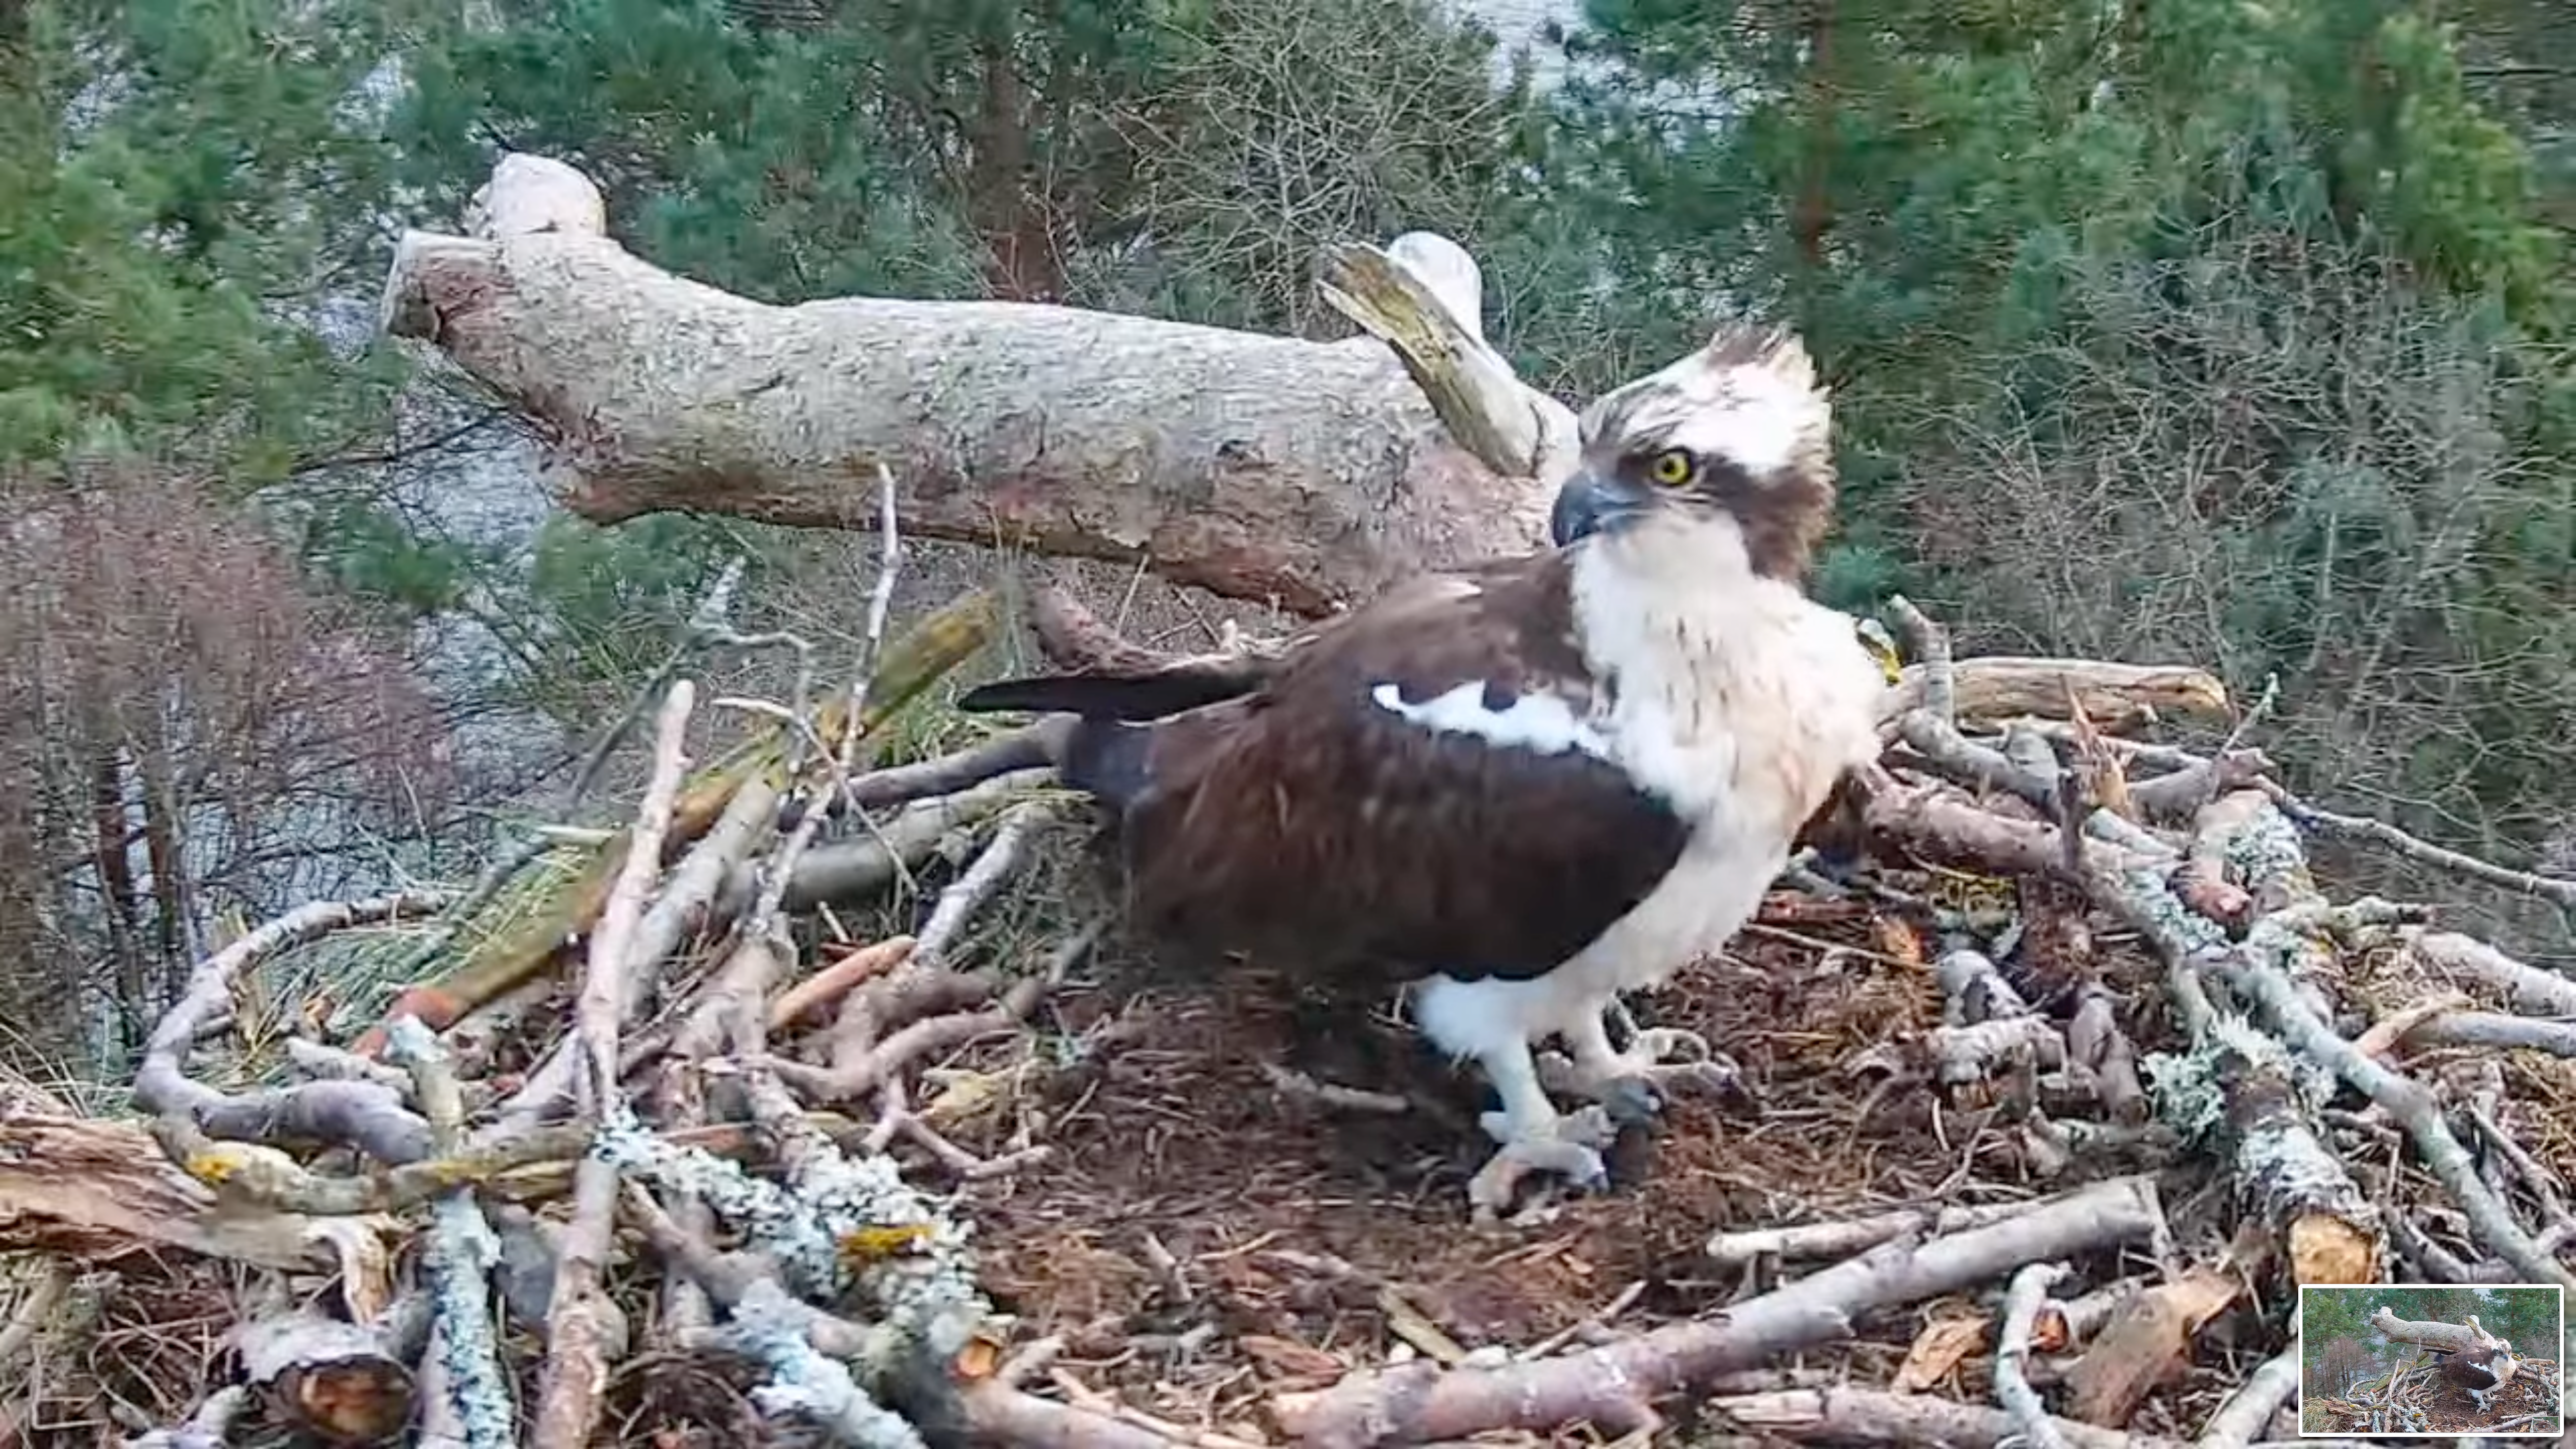 The osprey designated LM12, a male, on the webcam nest at Loch of the Lowes